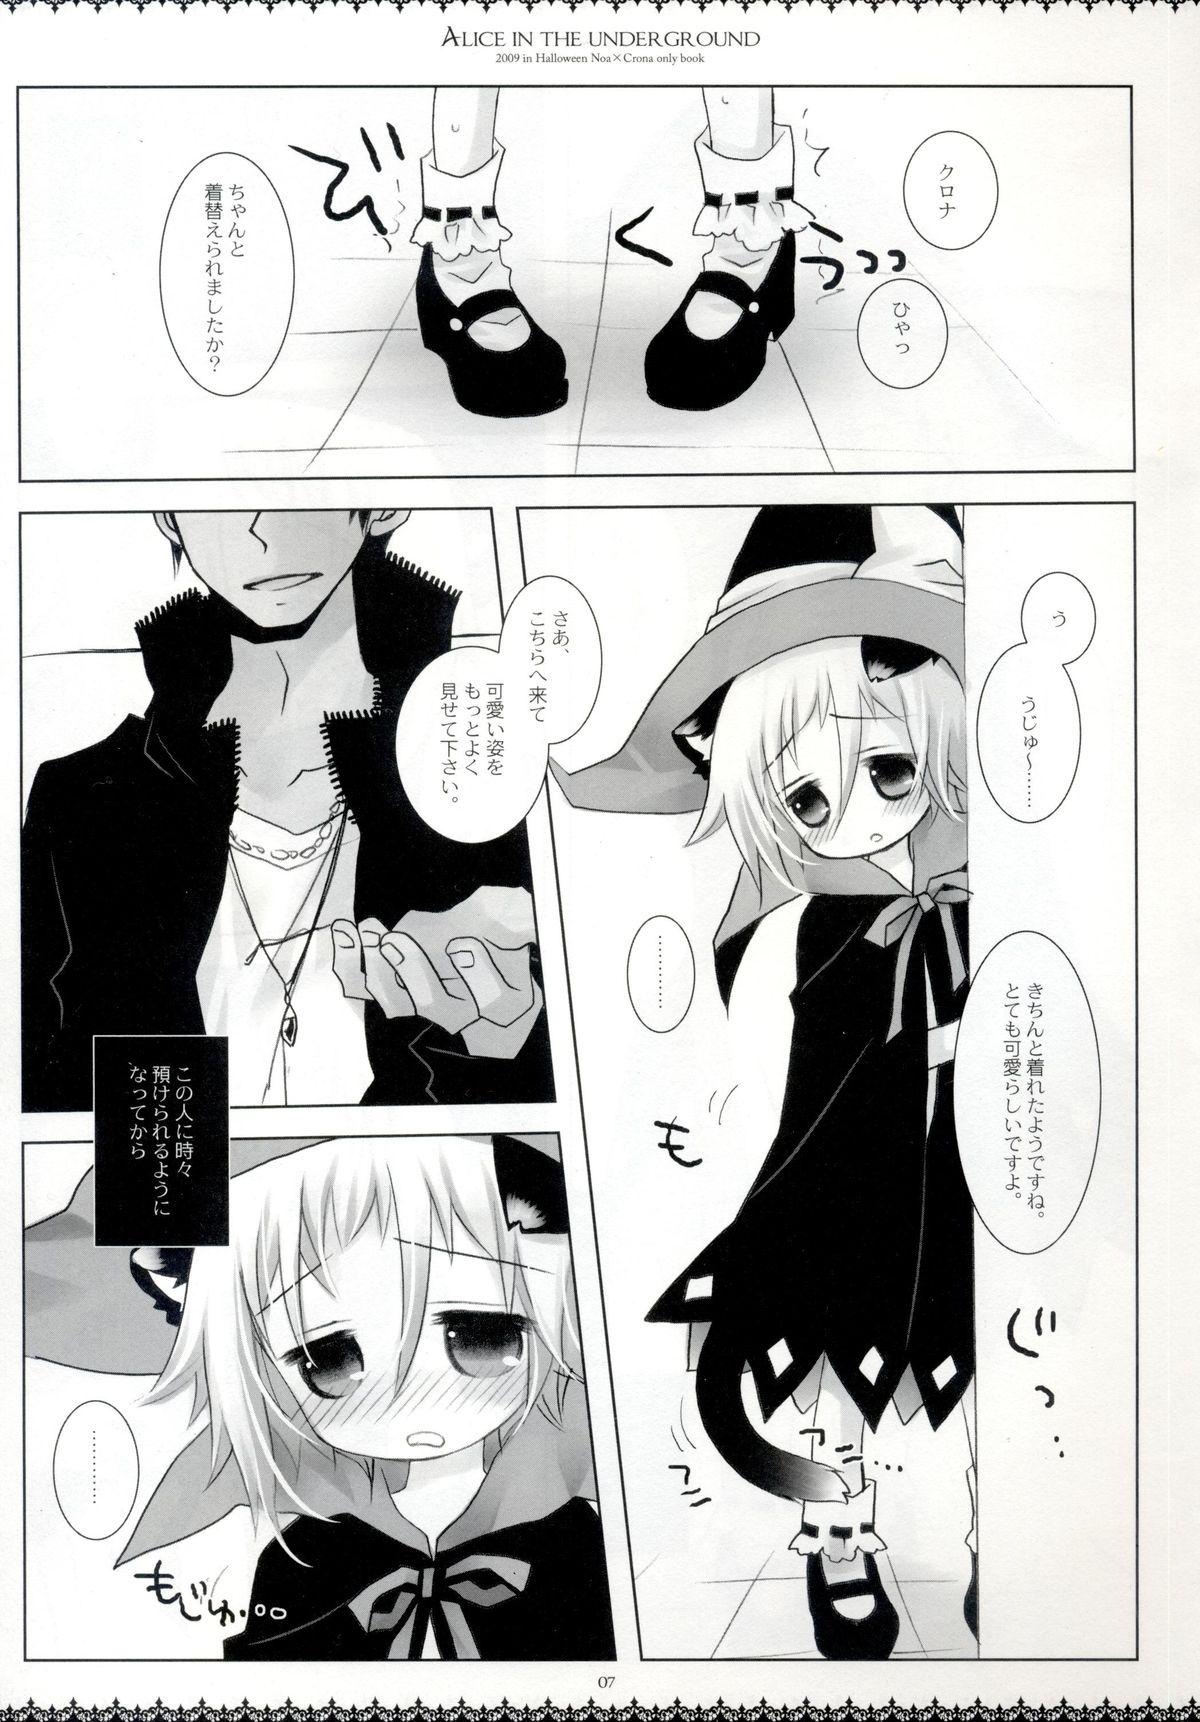 Novinhas Alice in the underground - Soul eater Amature Sex Tapes - Page 6